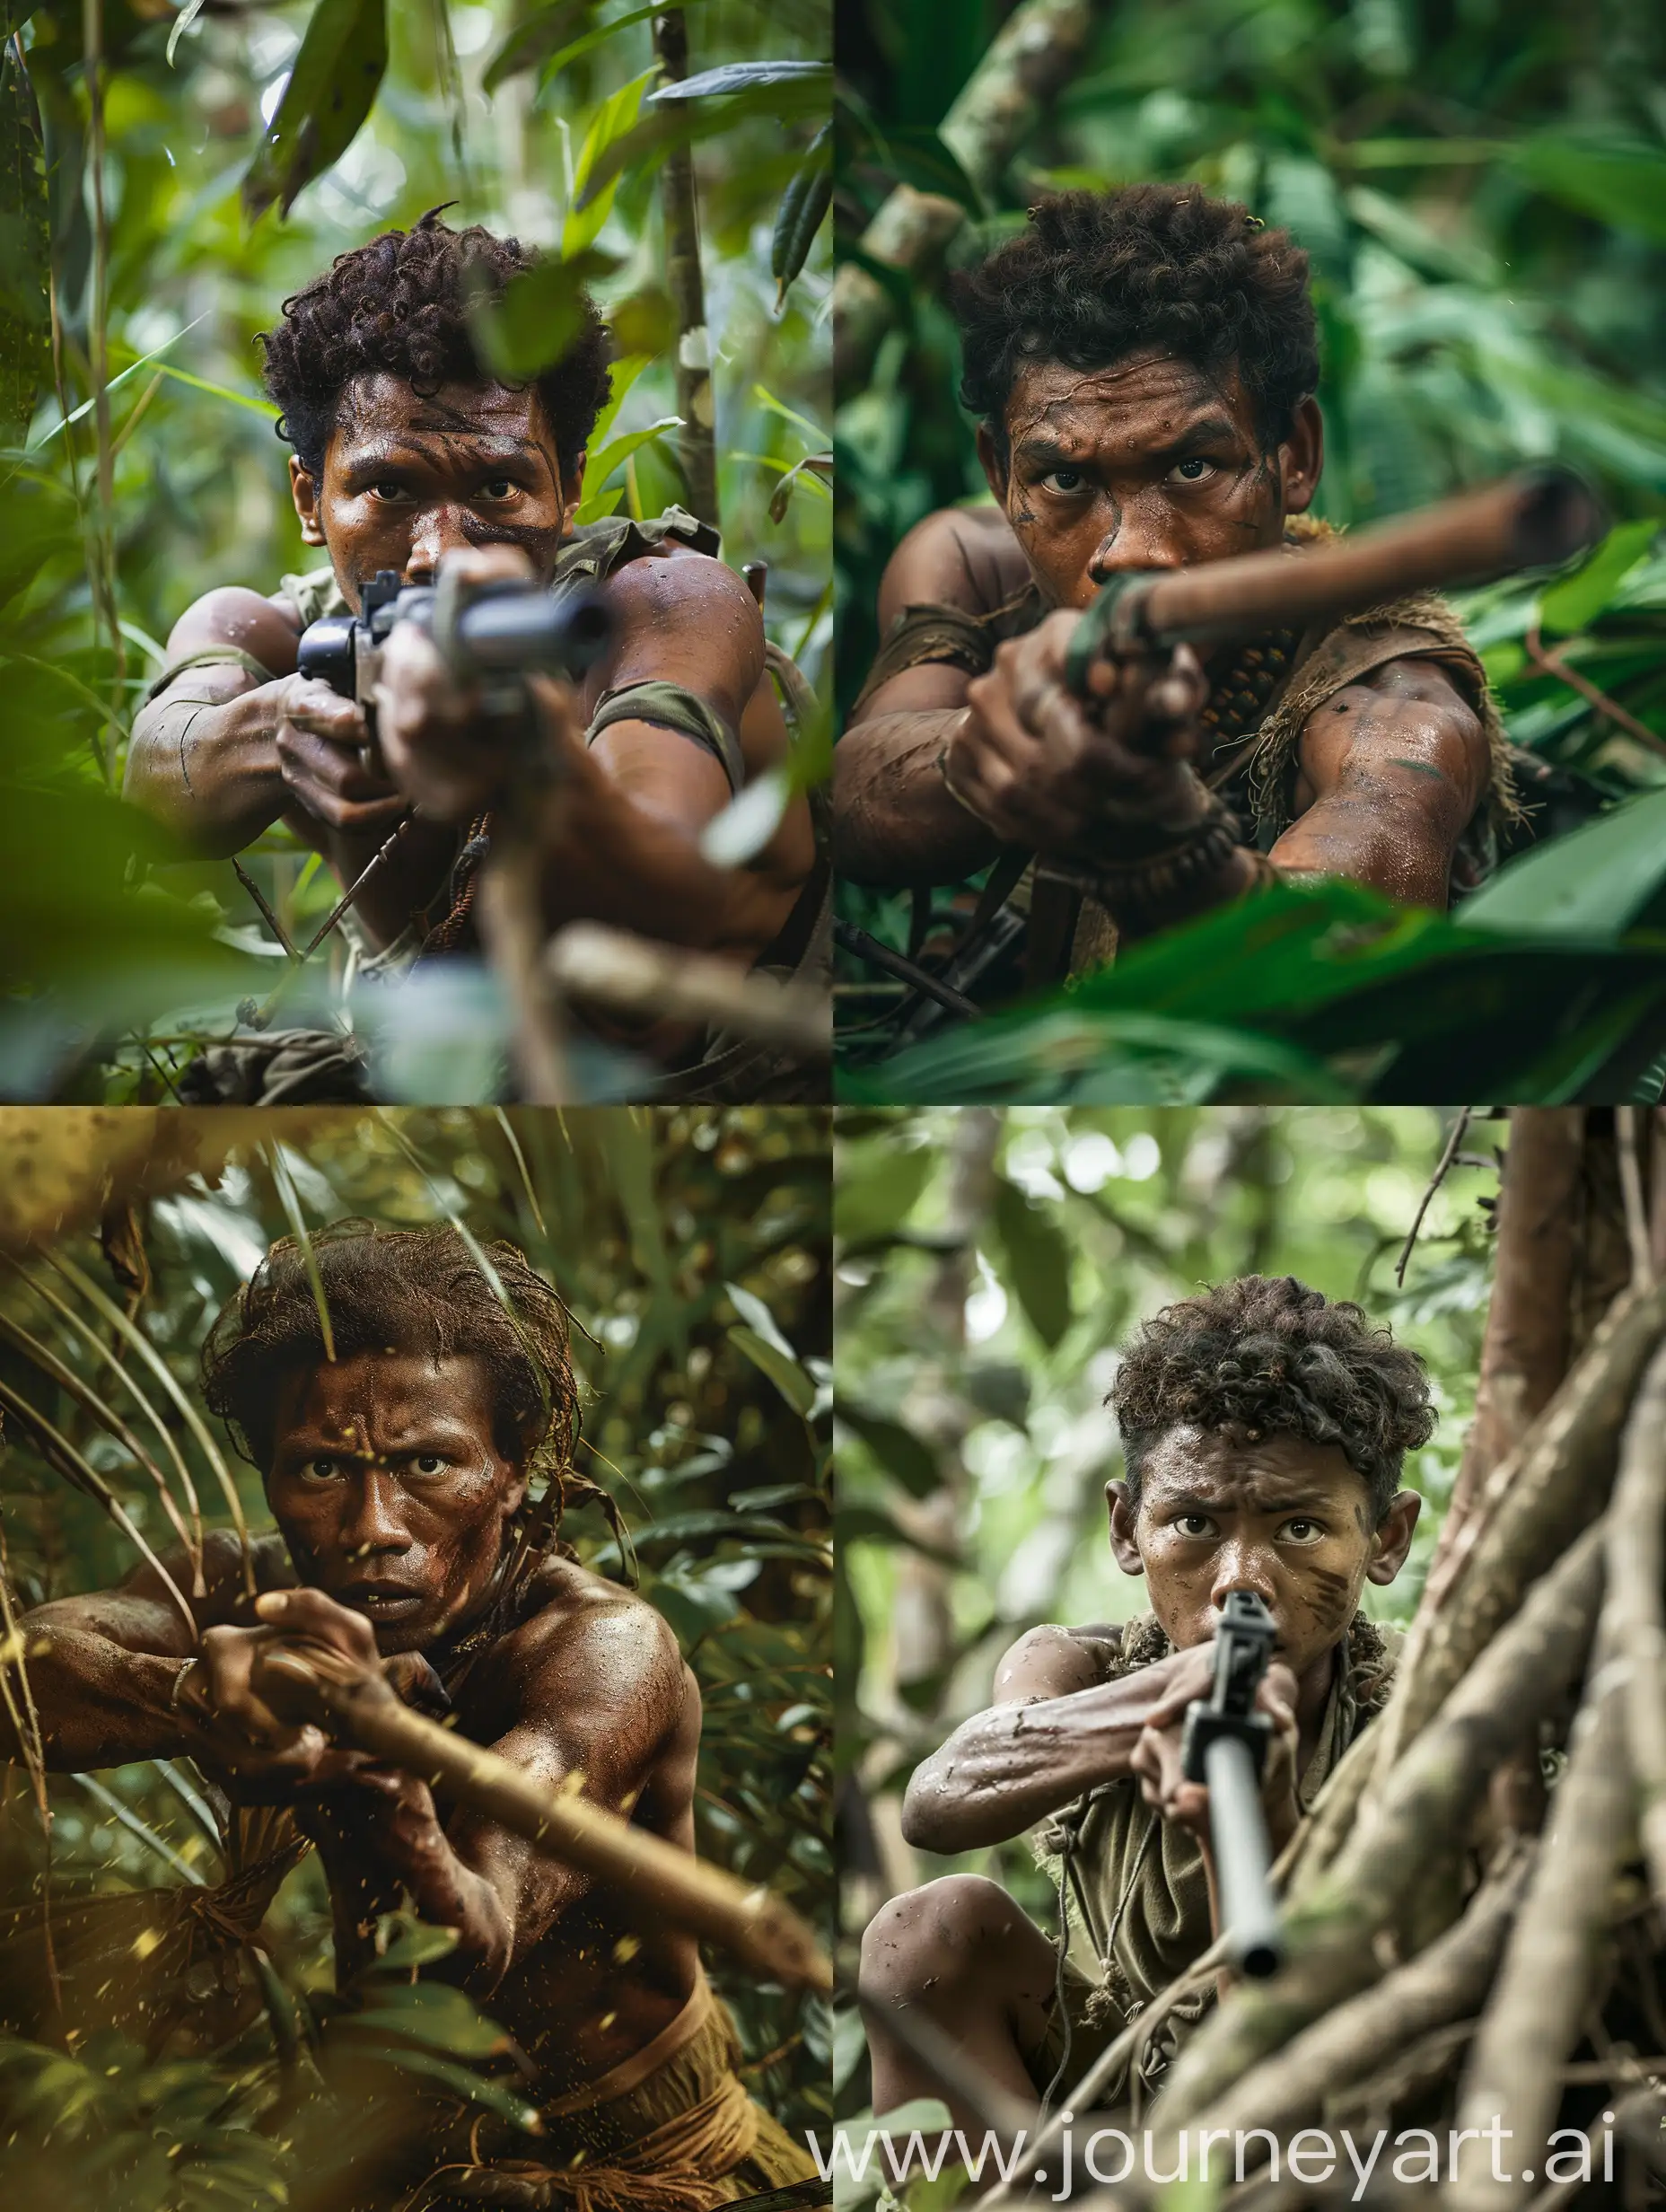 an Indonesian Papuan youth, with a weapon in his hand, in the Papuan forest, movie style